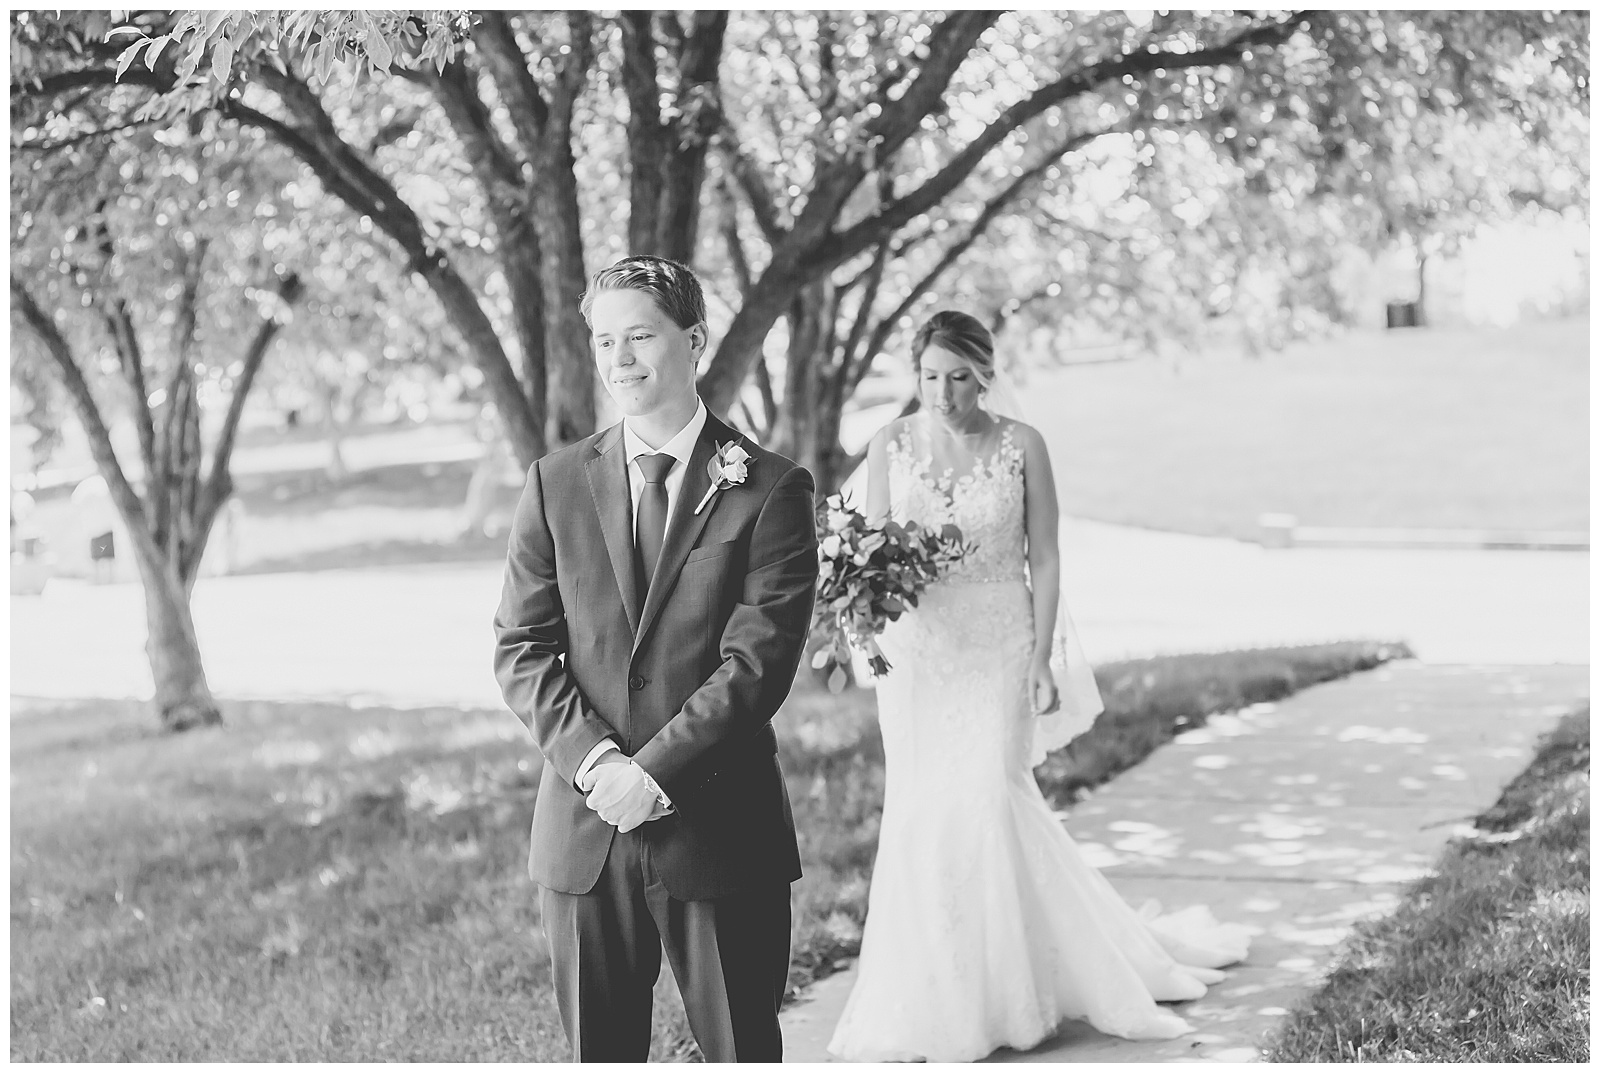 Wedding photography and videography by Kansas City wedding photographers Wisdom-Watson Weddings.